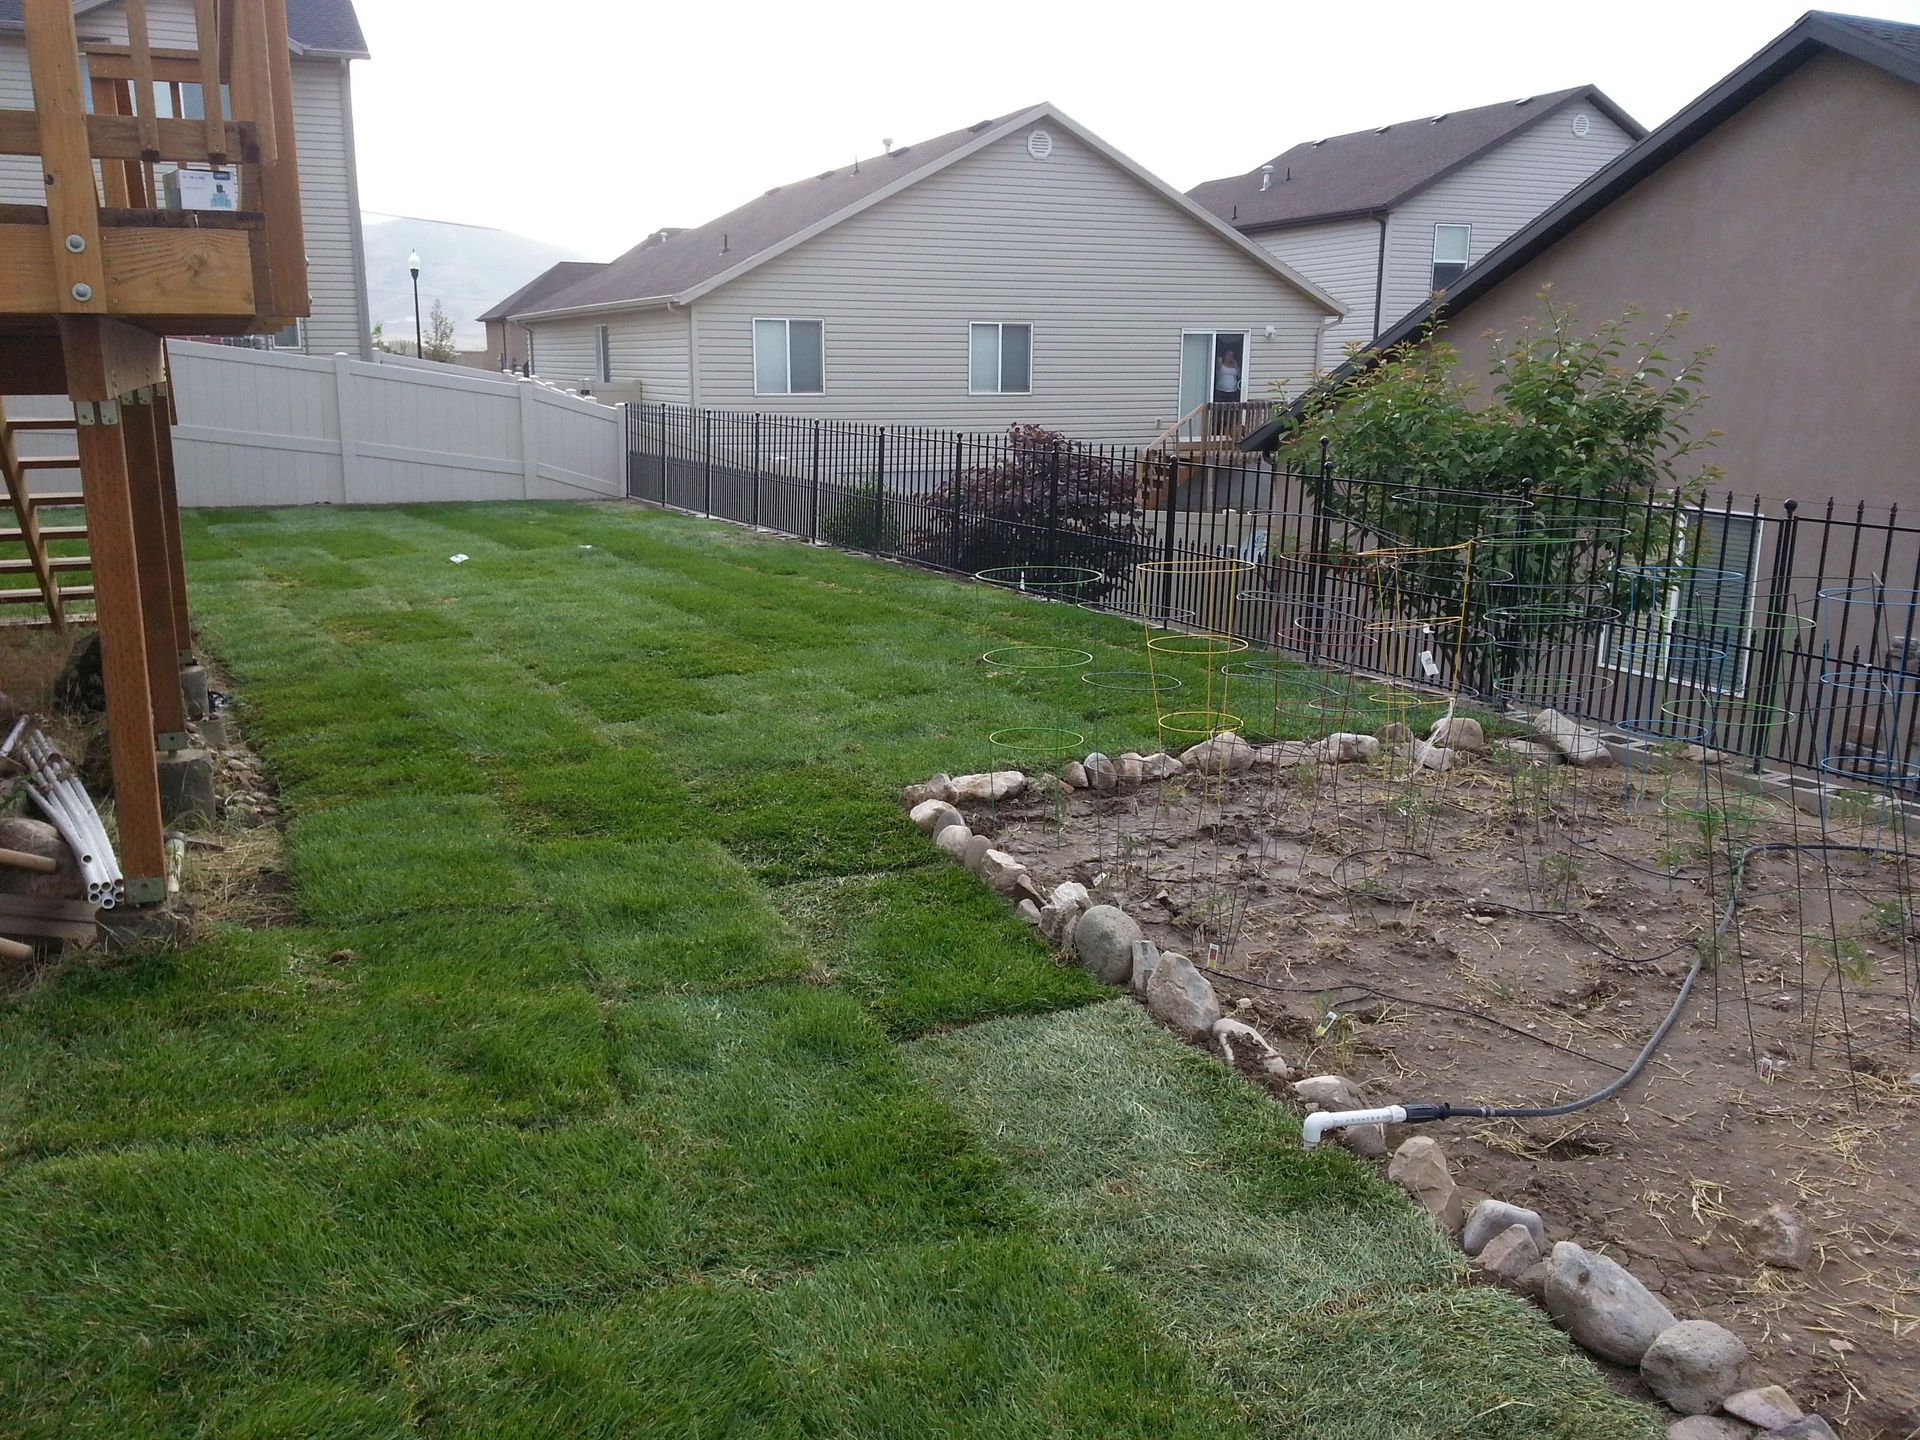 Freshly laid sod - call today for your fresh sod to be delivered!